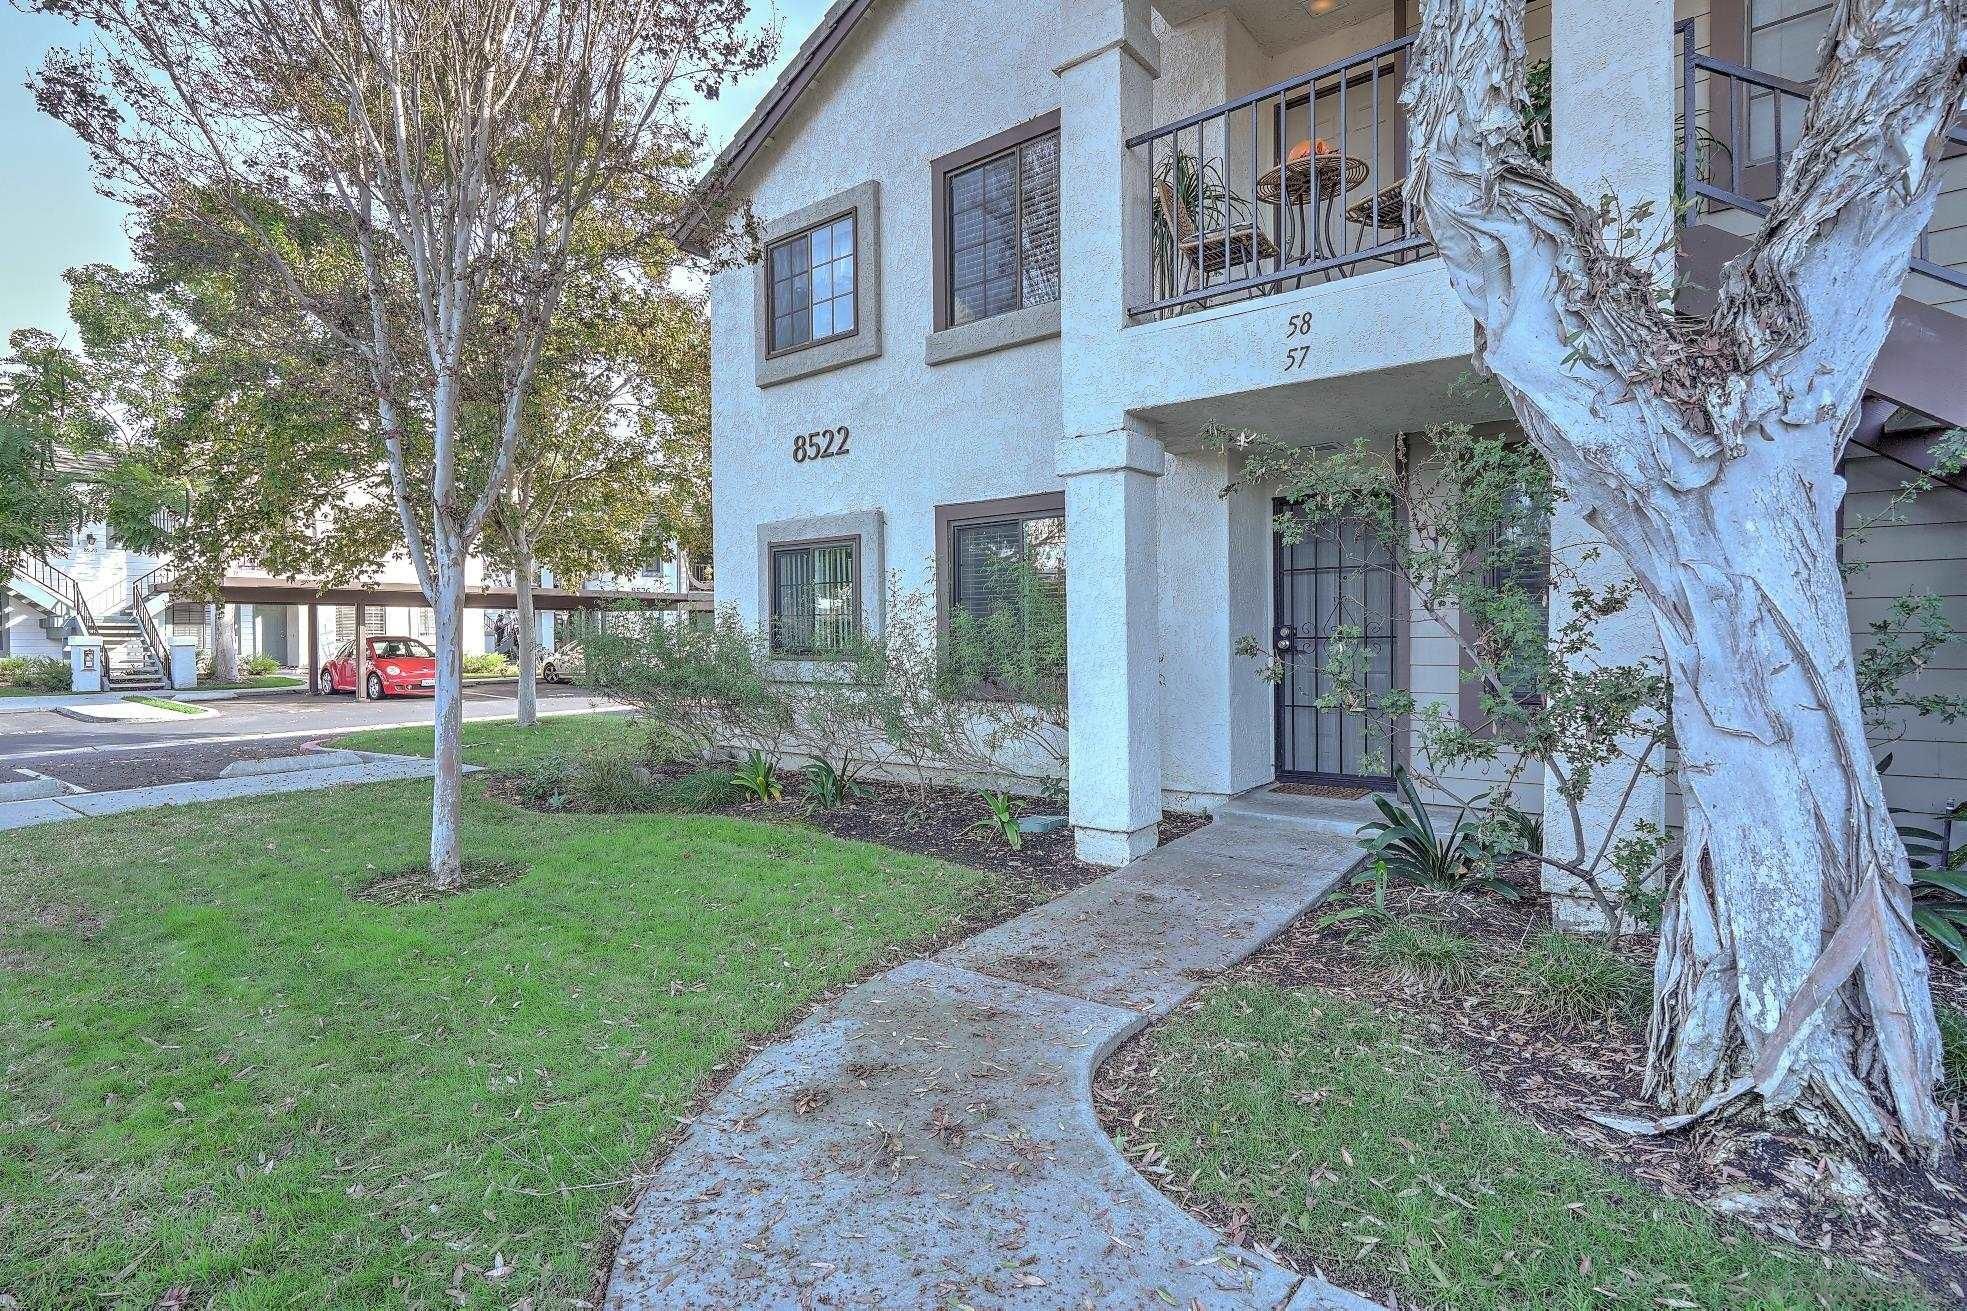 Main Photo: MIRA MESA Condo for sale : 2 bedrooms : 8522 Summer Dale #57 in San Diego